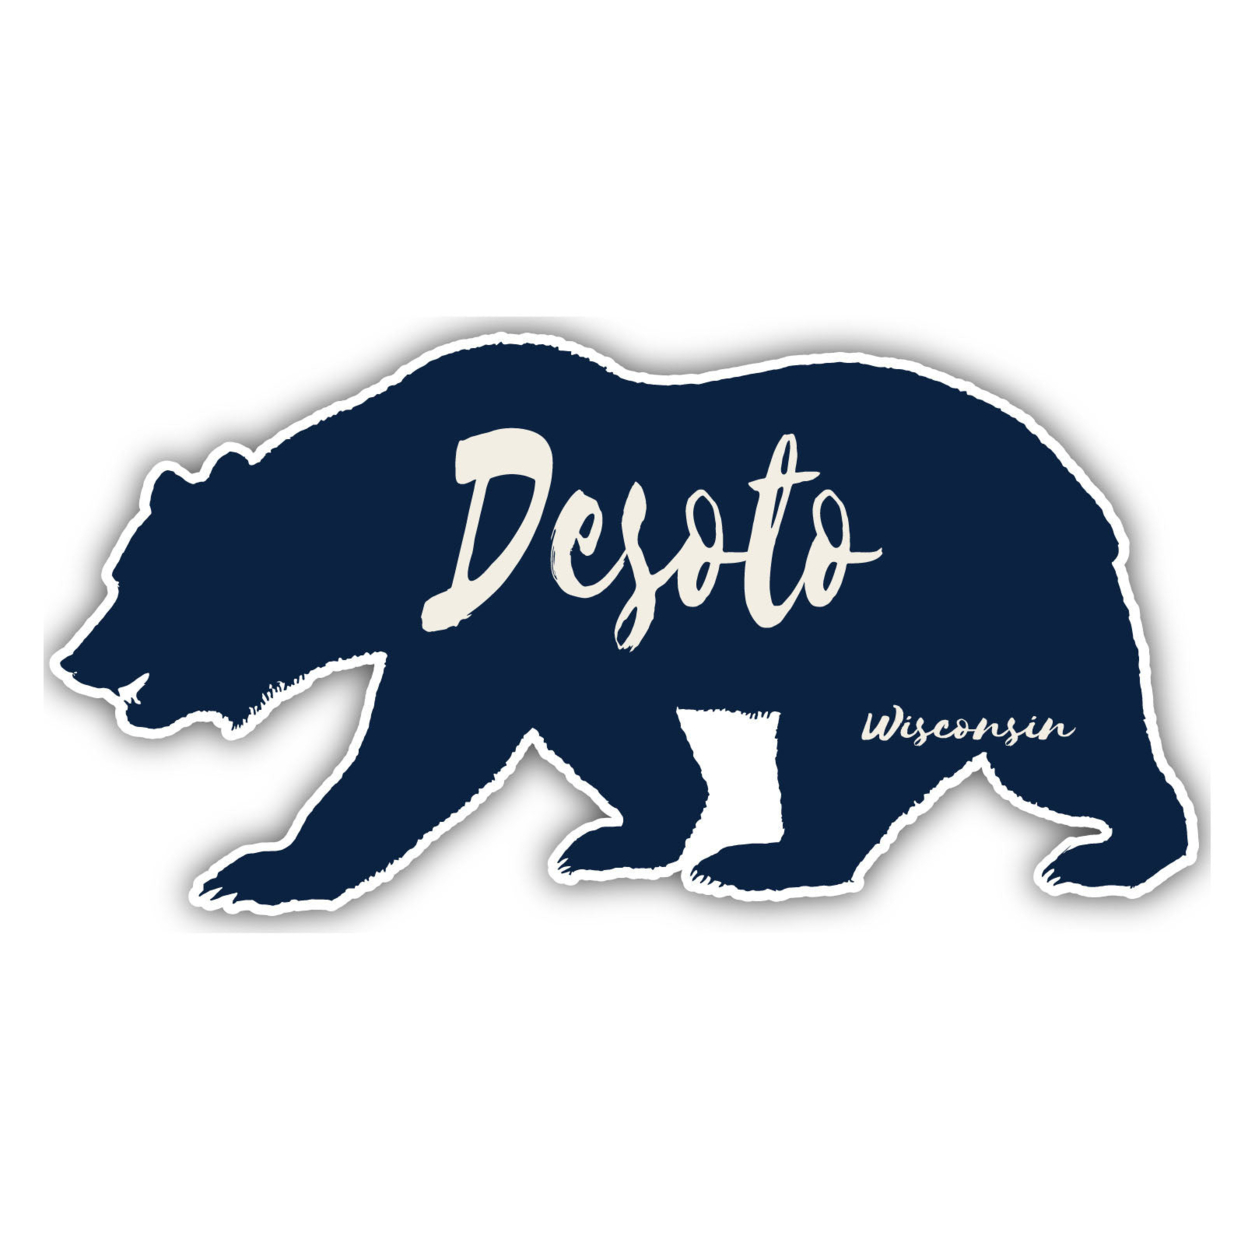 DeSoto Wisconsin Souvenir Decorative Stickers (Choose Theme And Size) - 4-Pack, 12-Inch, Bear